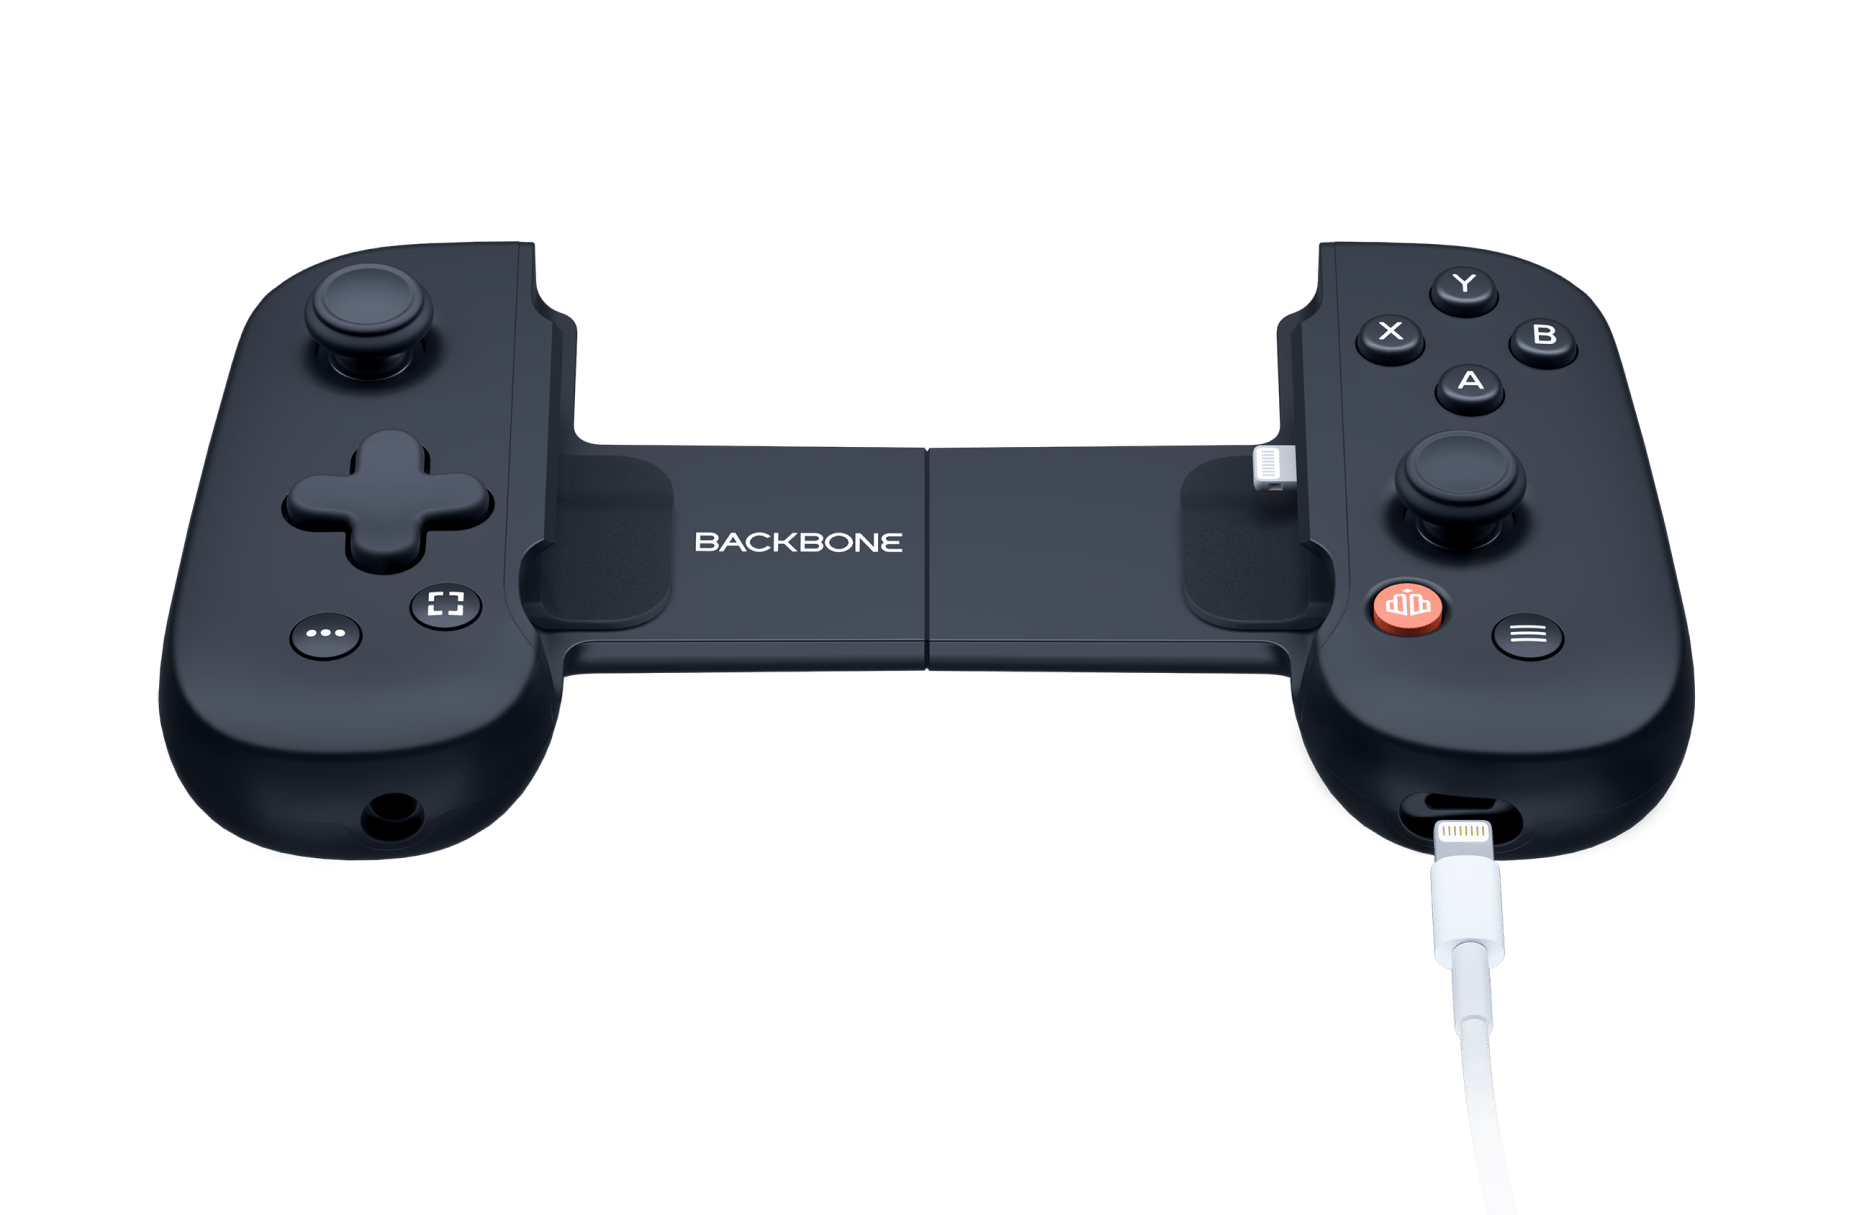 Backbone controller with a cable connected